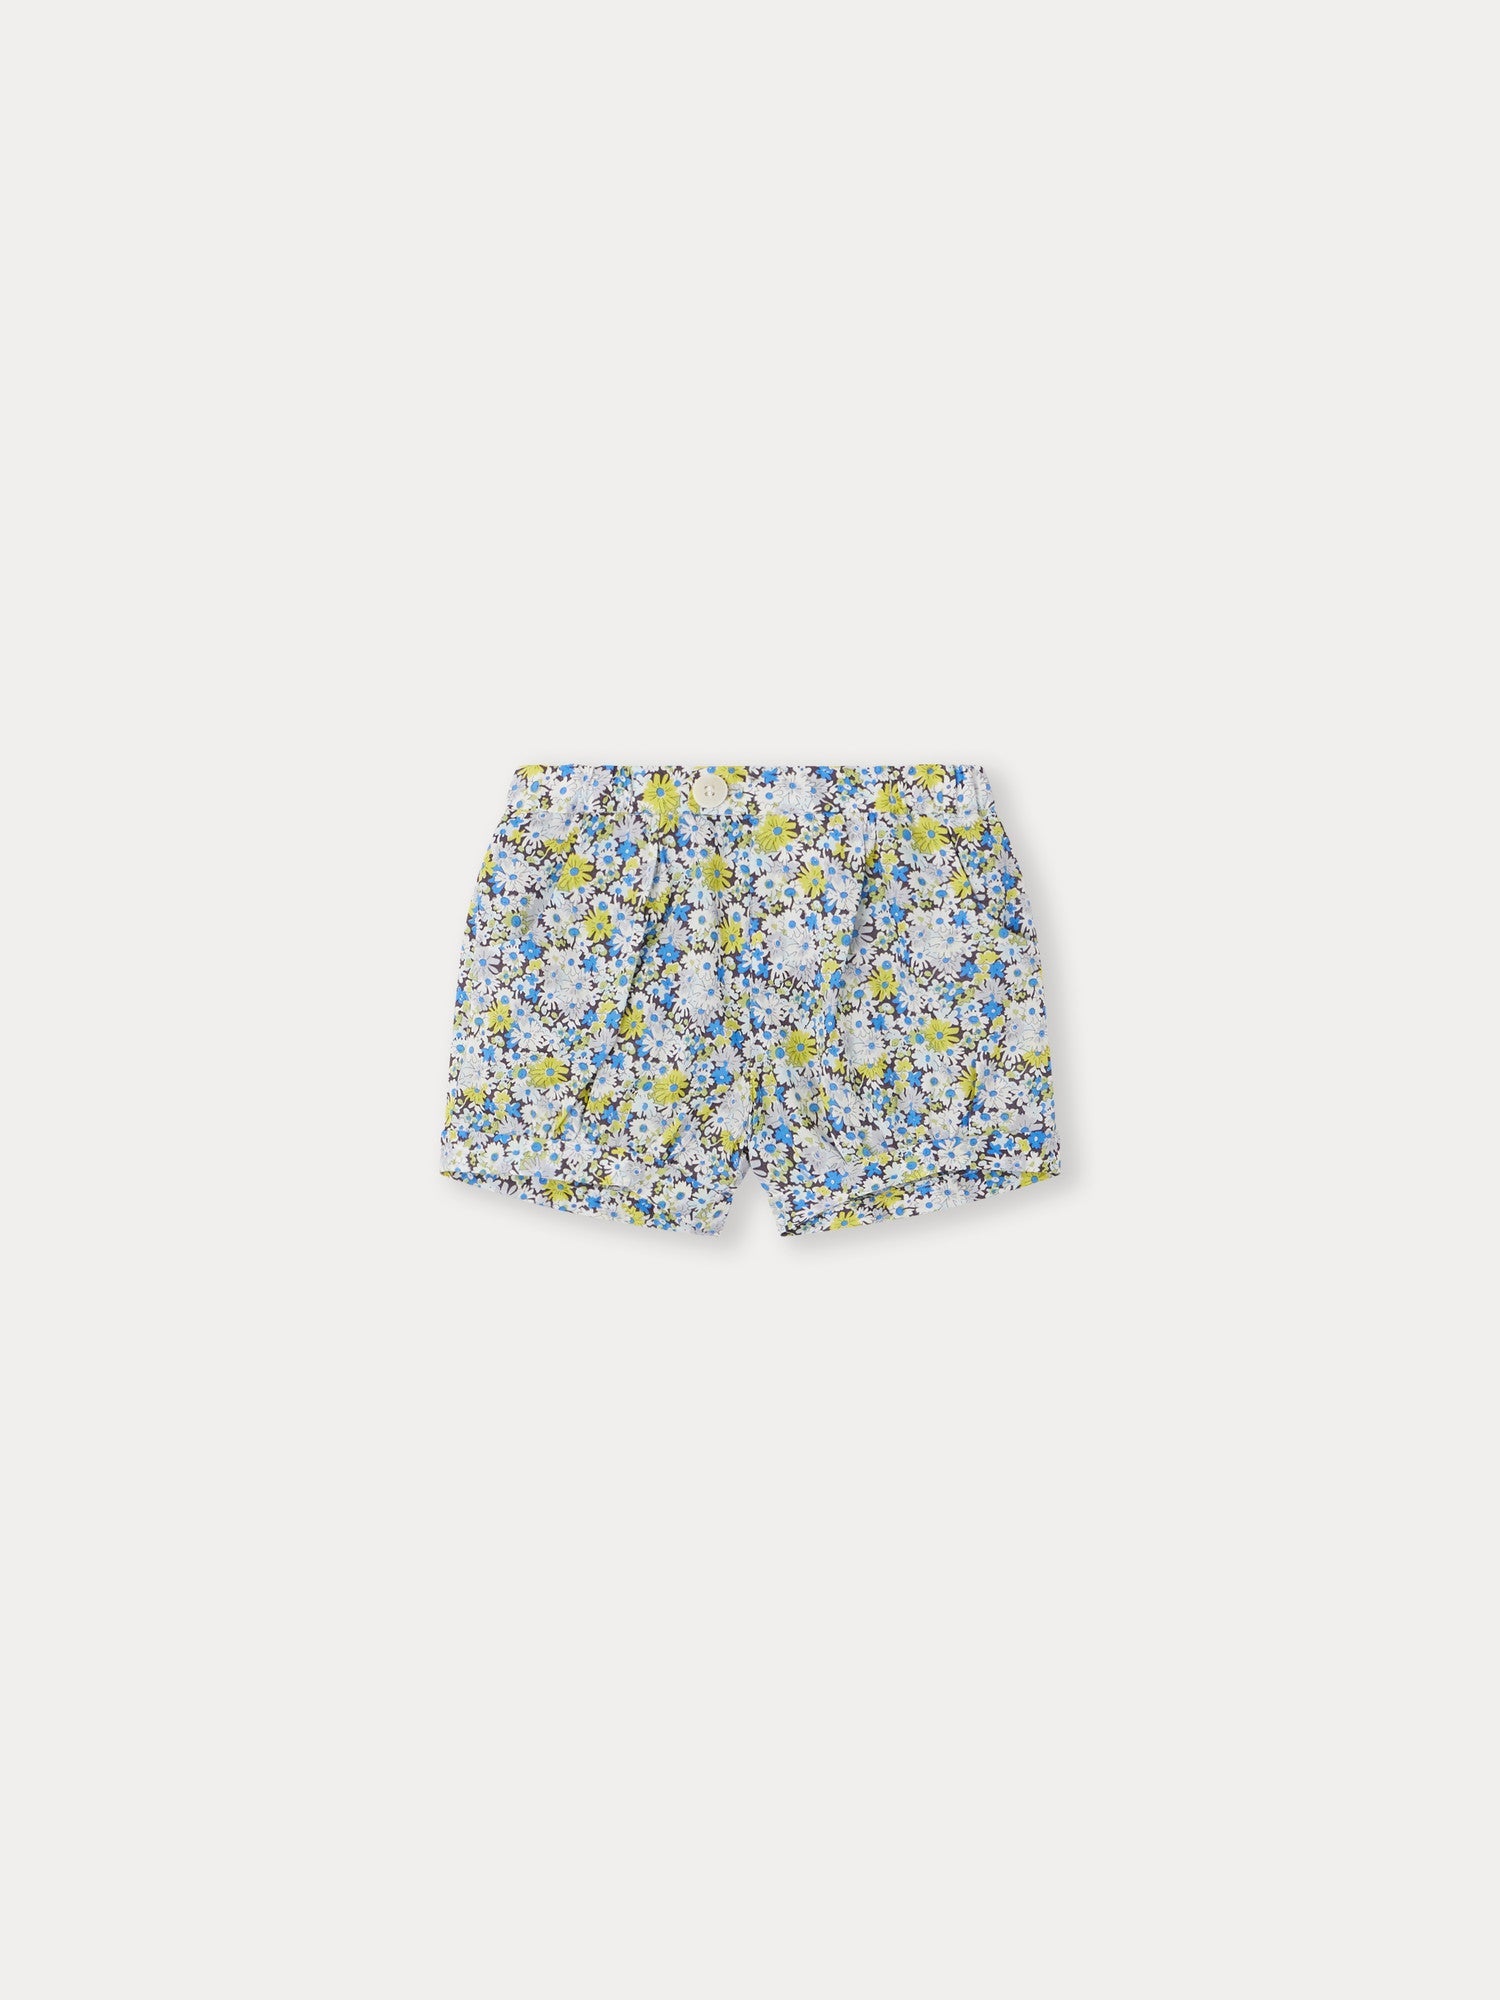 Baby Girls Blue Floral Cotton Shorts